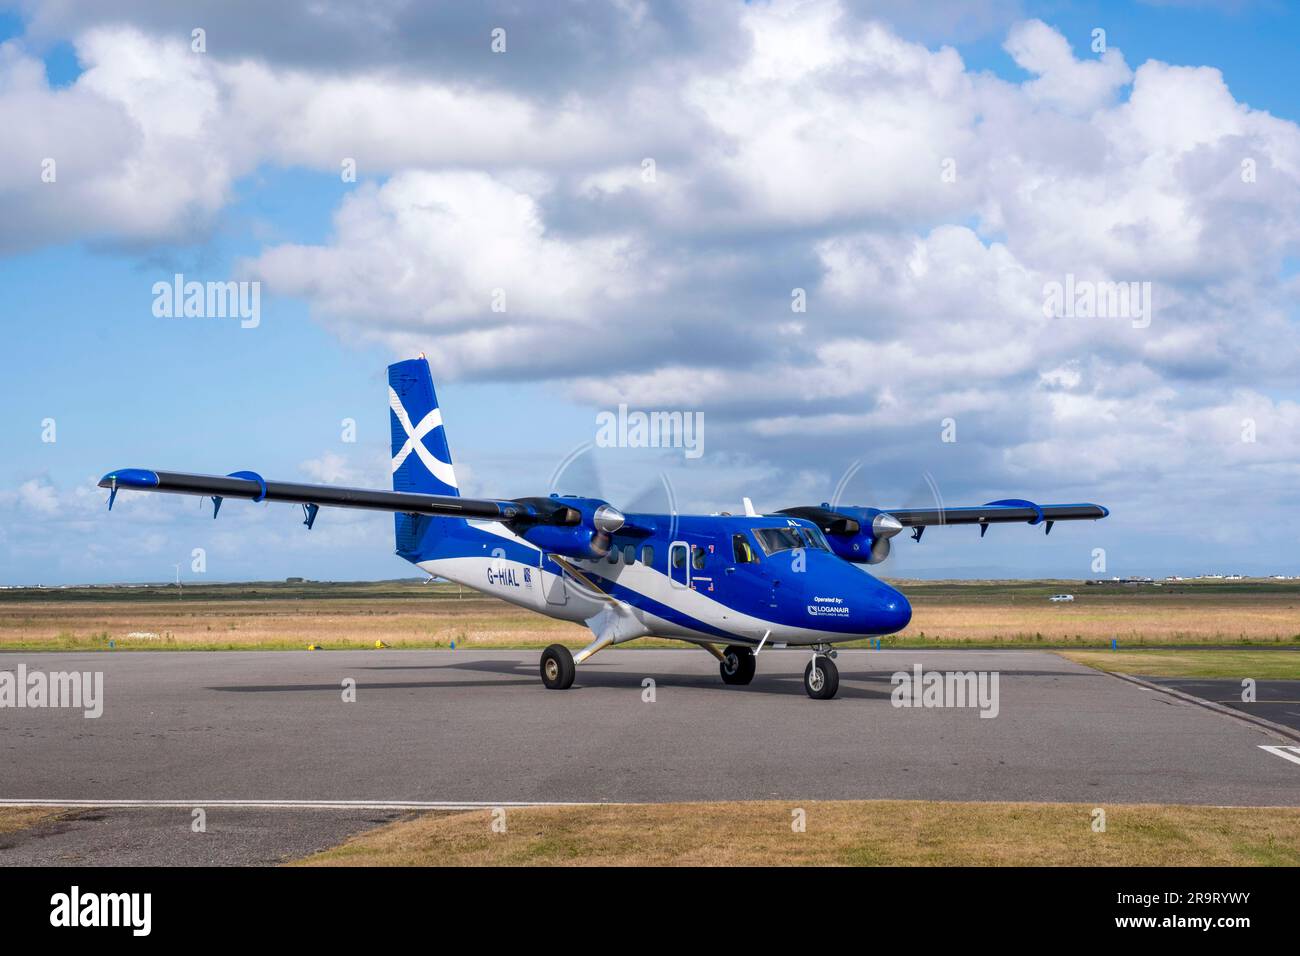 G-Hail Loganair Viking DHC-6-400 Twin Otter aircraft prepares to take off from Tiree Airport, Isle of Tiree, Inner Hebrides, Scotland UK. Stock Photo